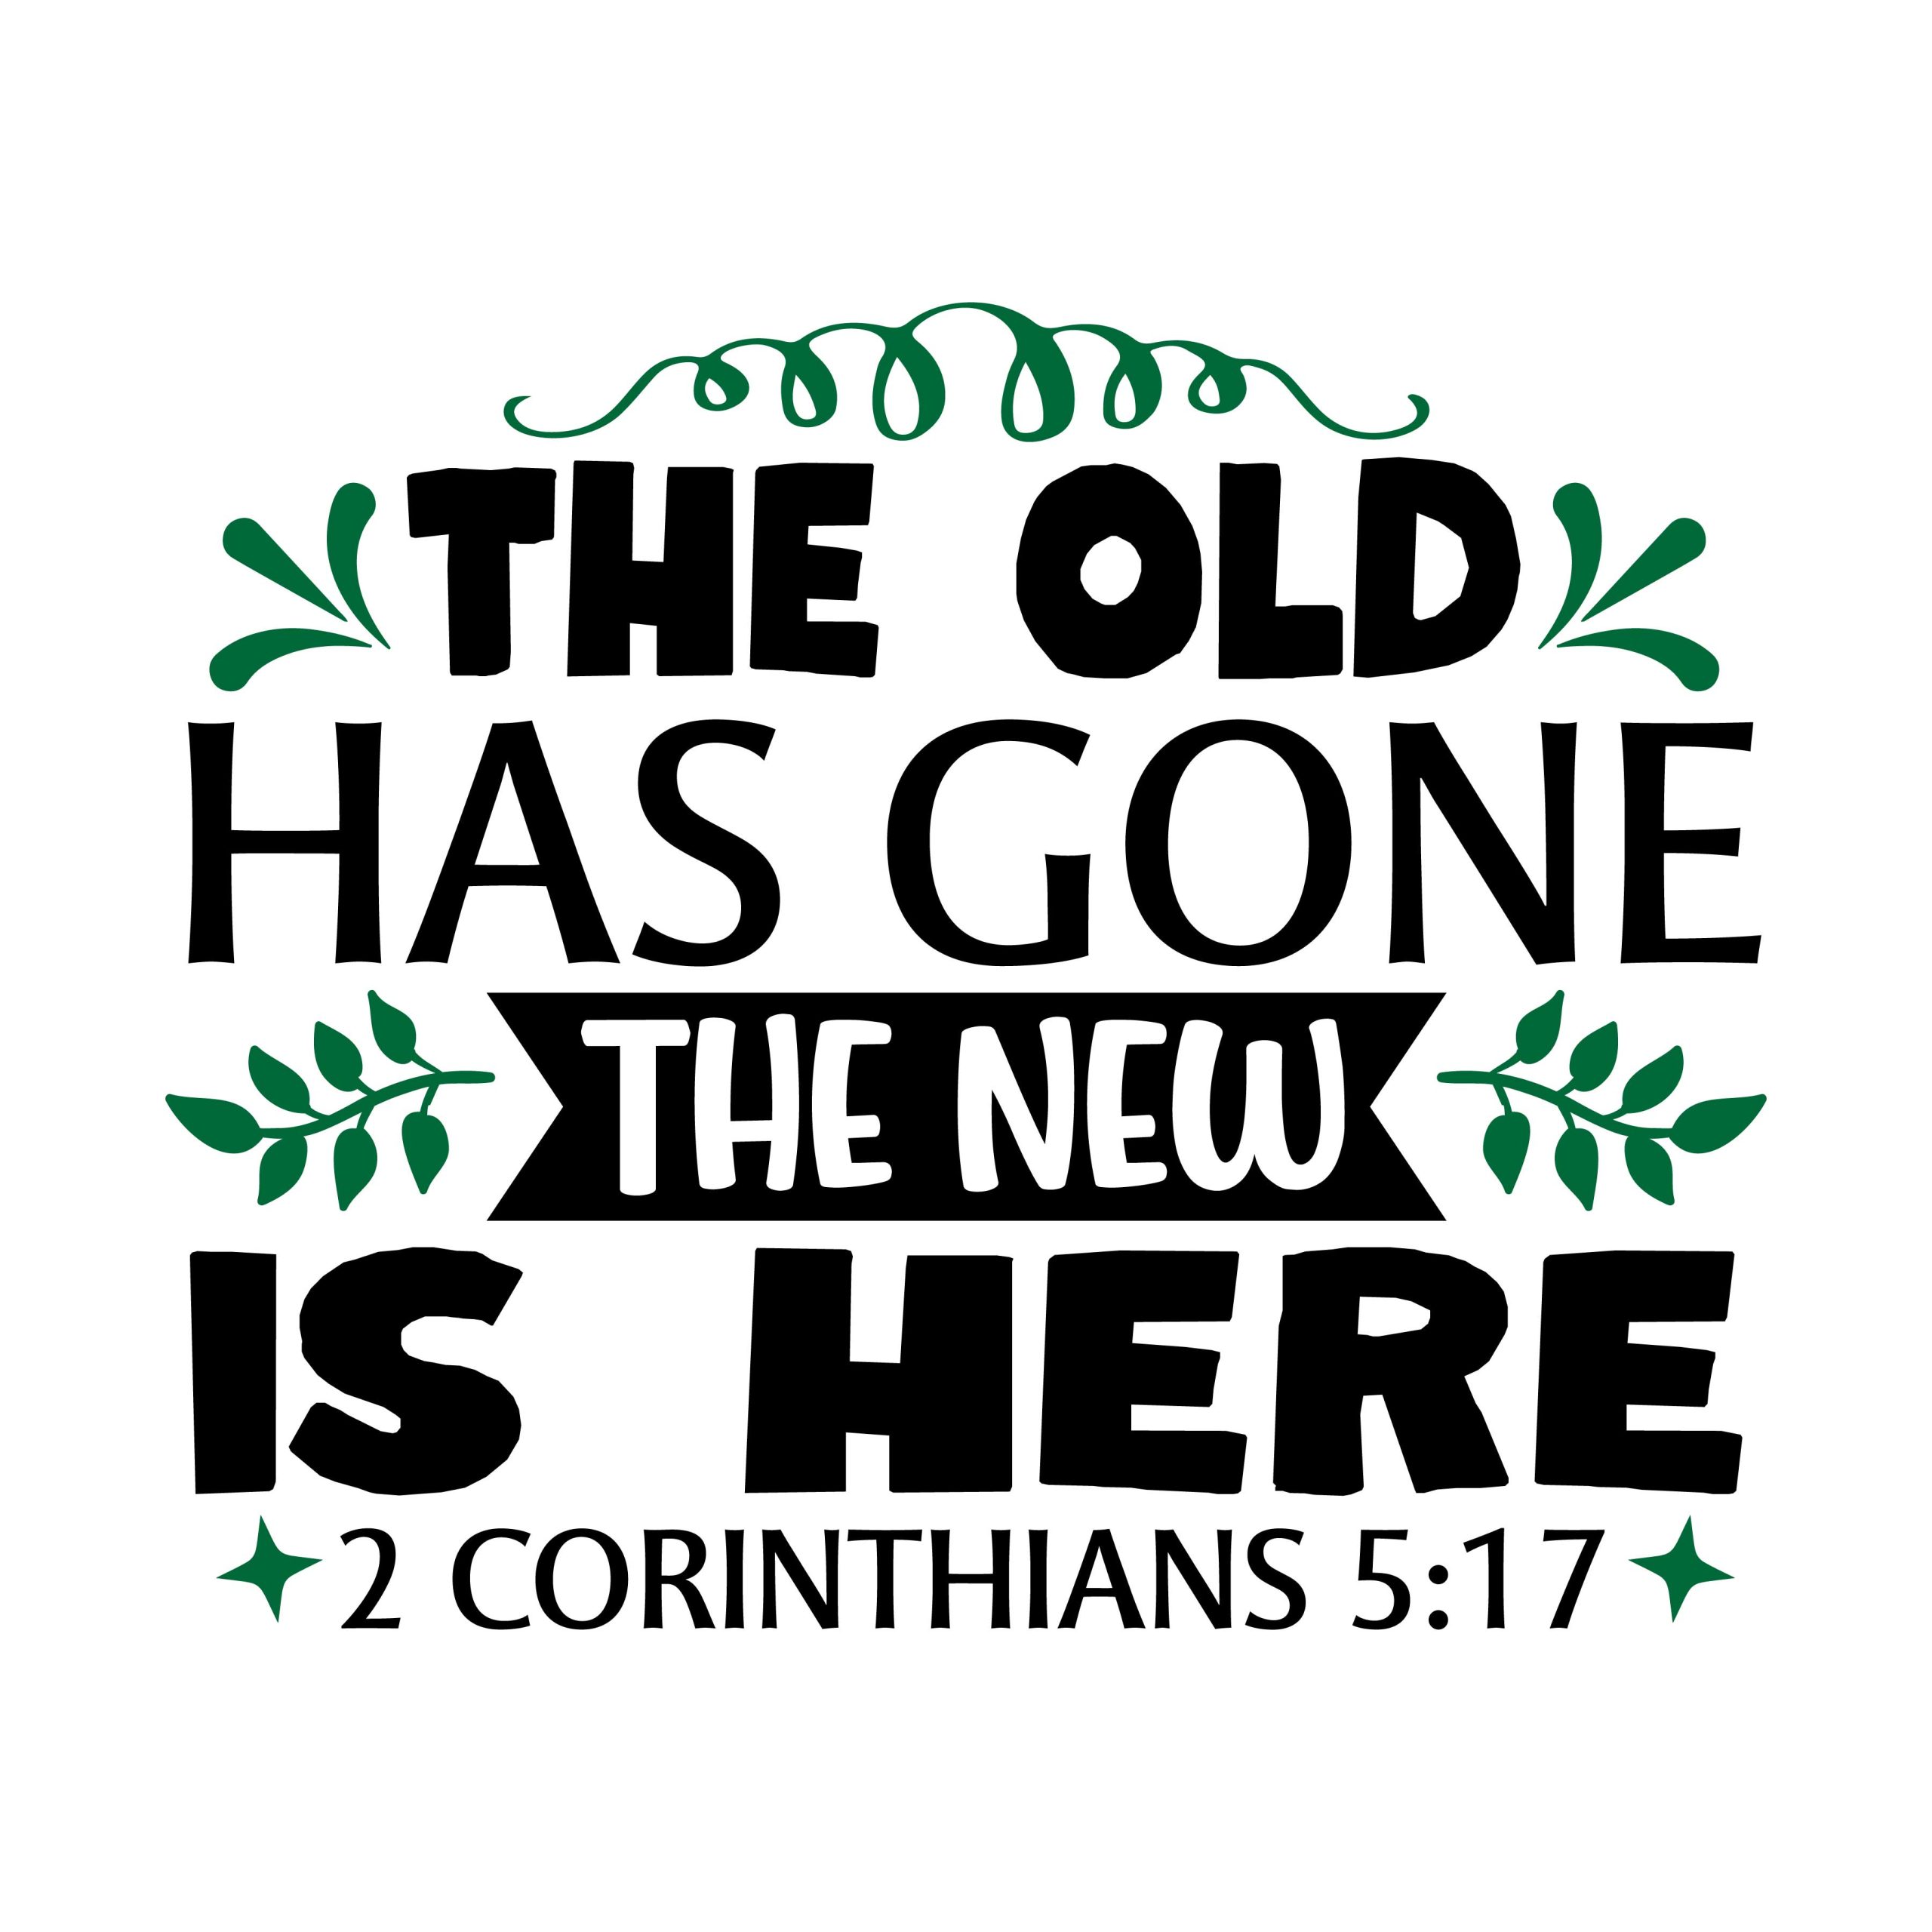 The old has gone the new is here 2 Corinthians 5:17, bible verses, scripture verses, svg files, passages, sayings, cricut designs, silhouette, embroidery, bundle, free cut files, design space, vector